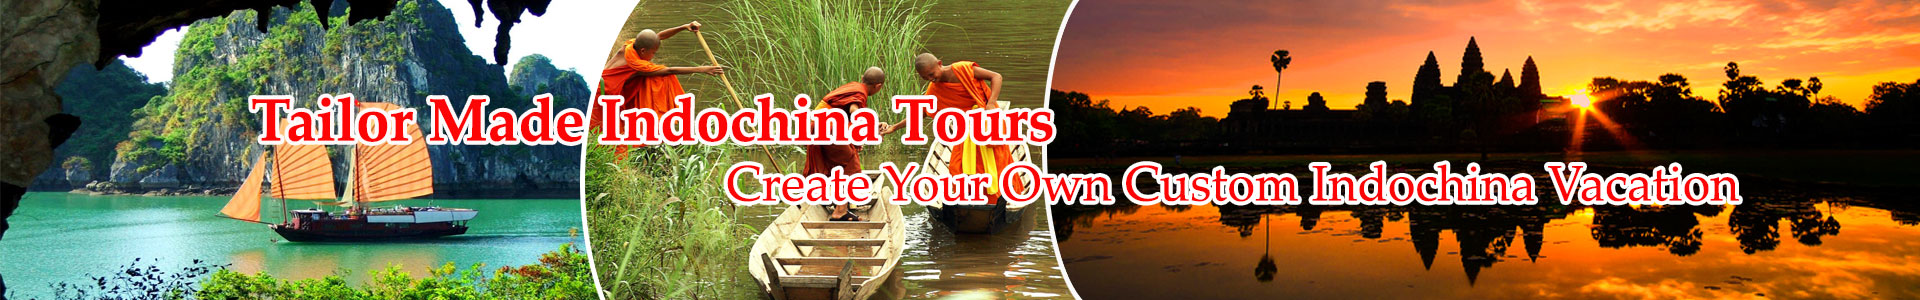 Tailor-Made-Indochina-Tours